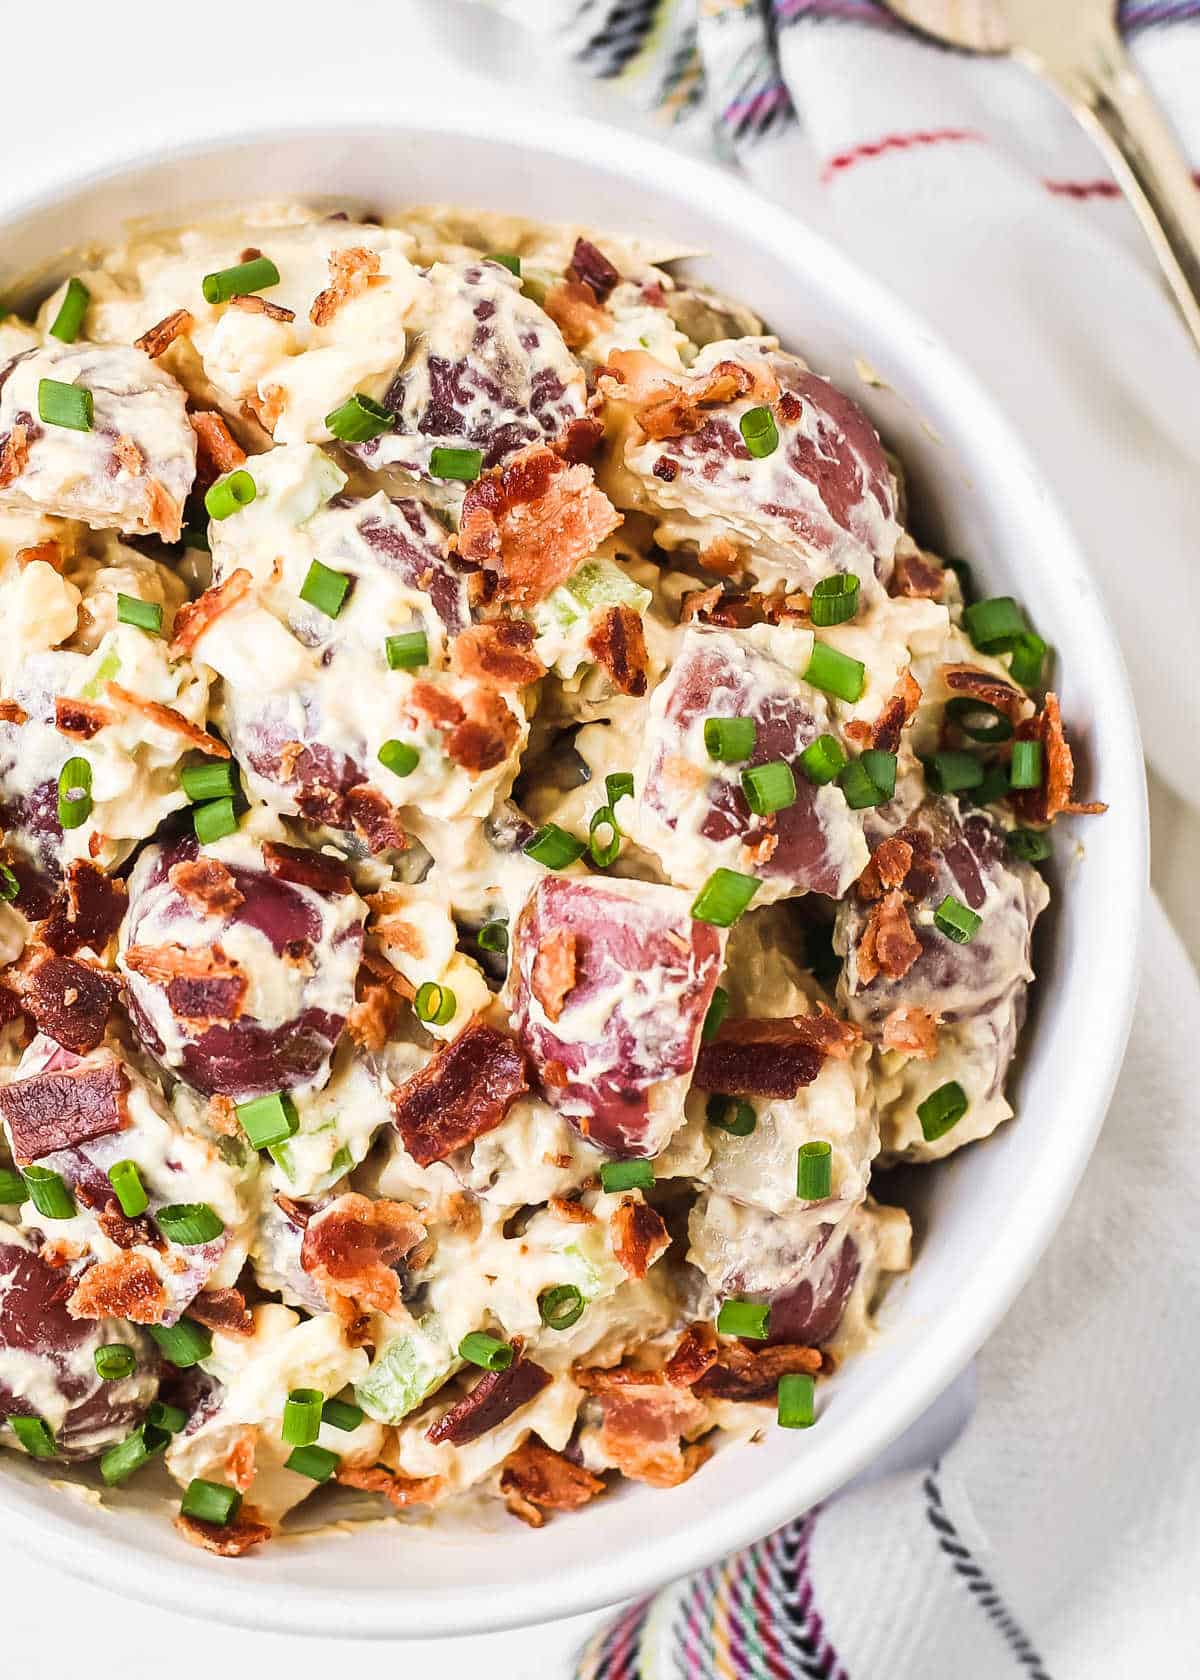 potato salad with red potatoes in creamy dressing with bacon and chives, overhead.